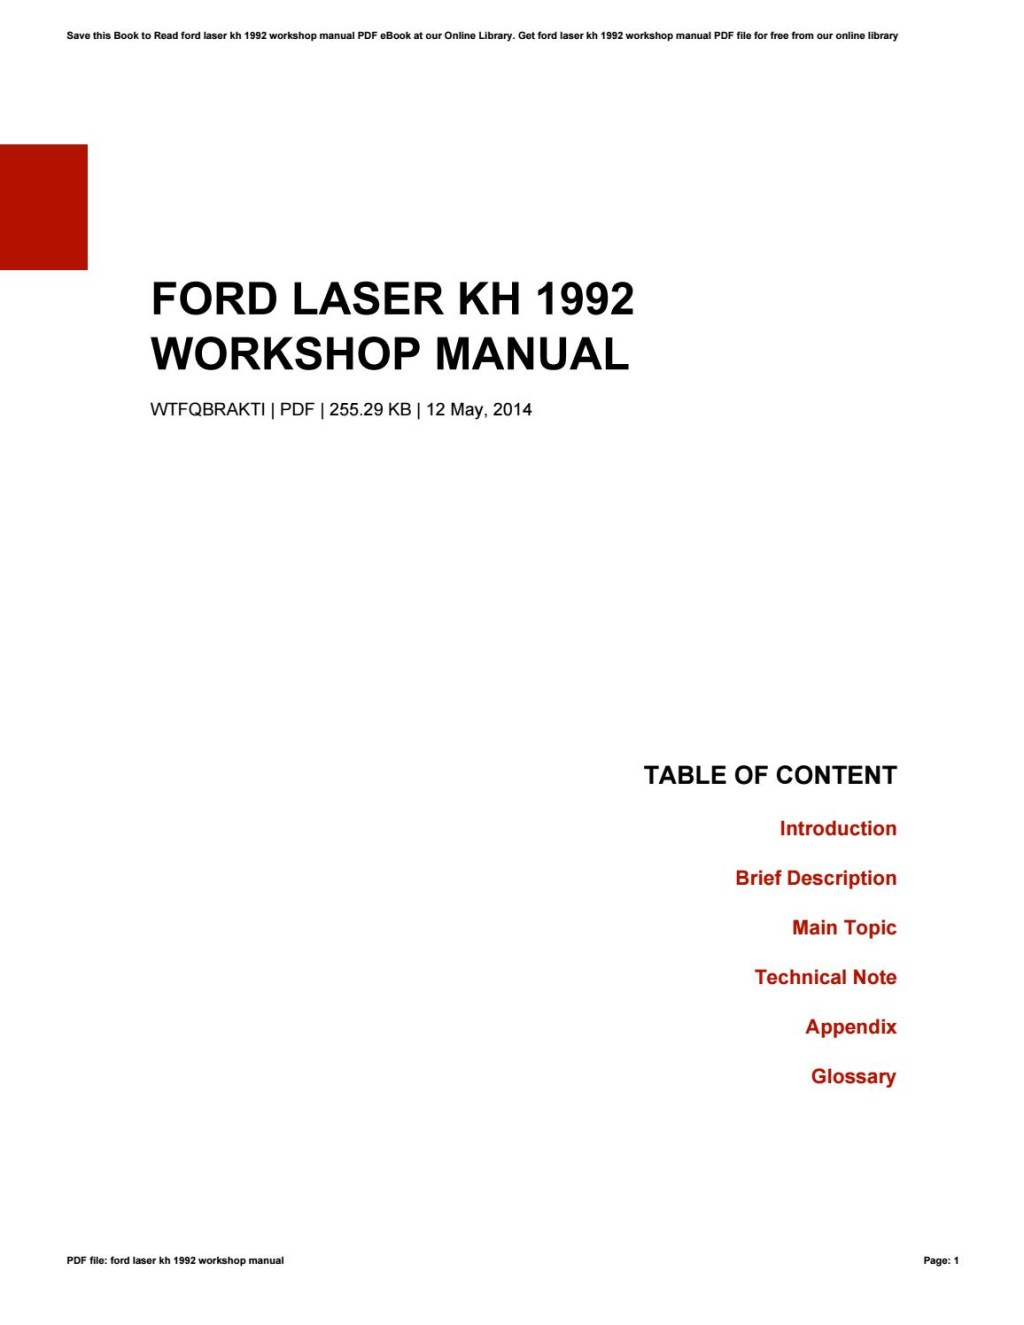 Picture of: Ford laser kh  workshop manual by RalphAndrade – Issuu